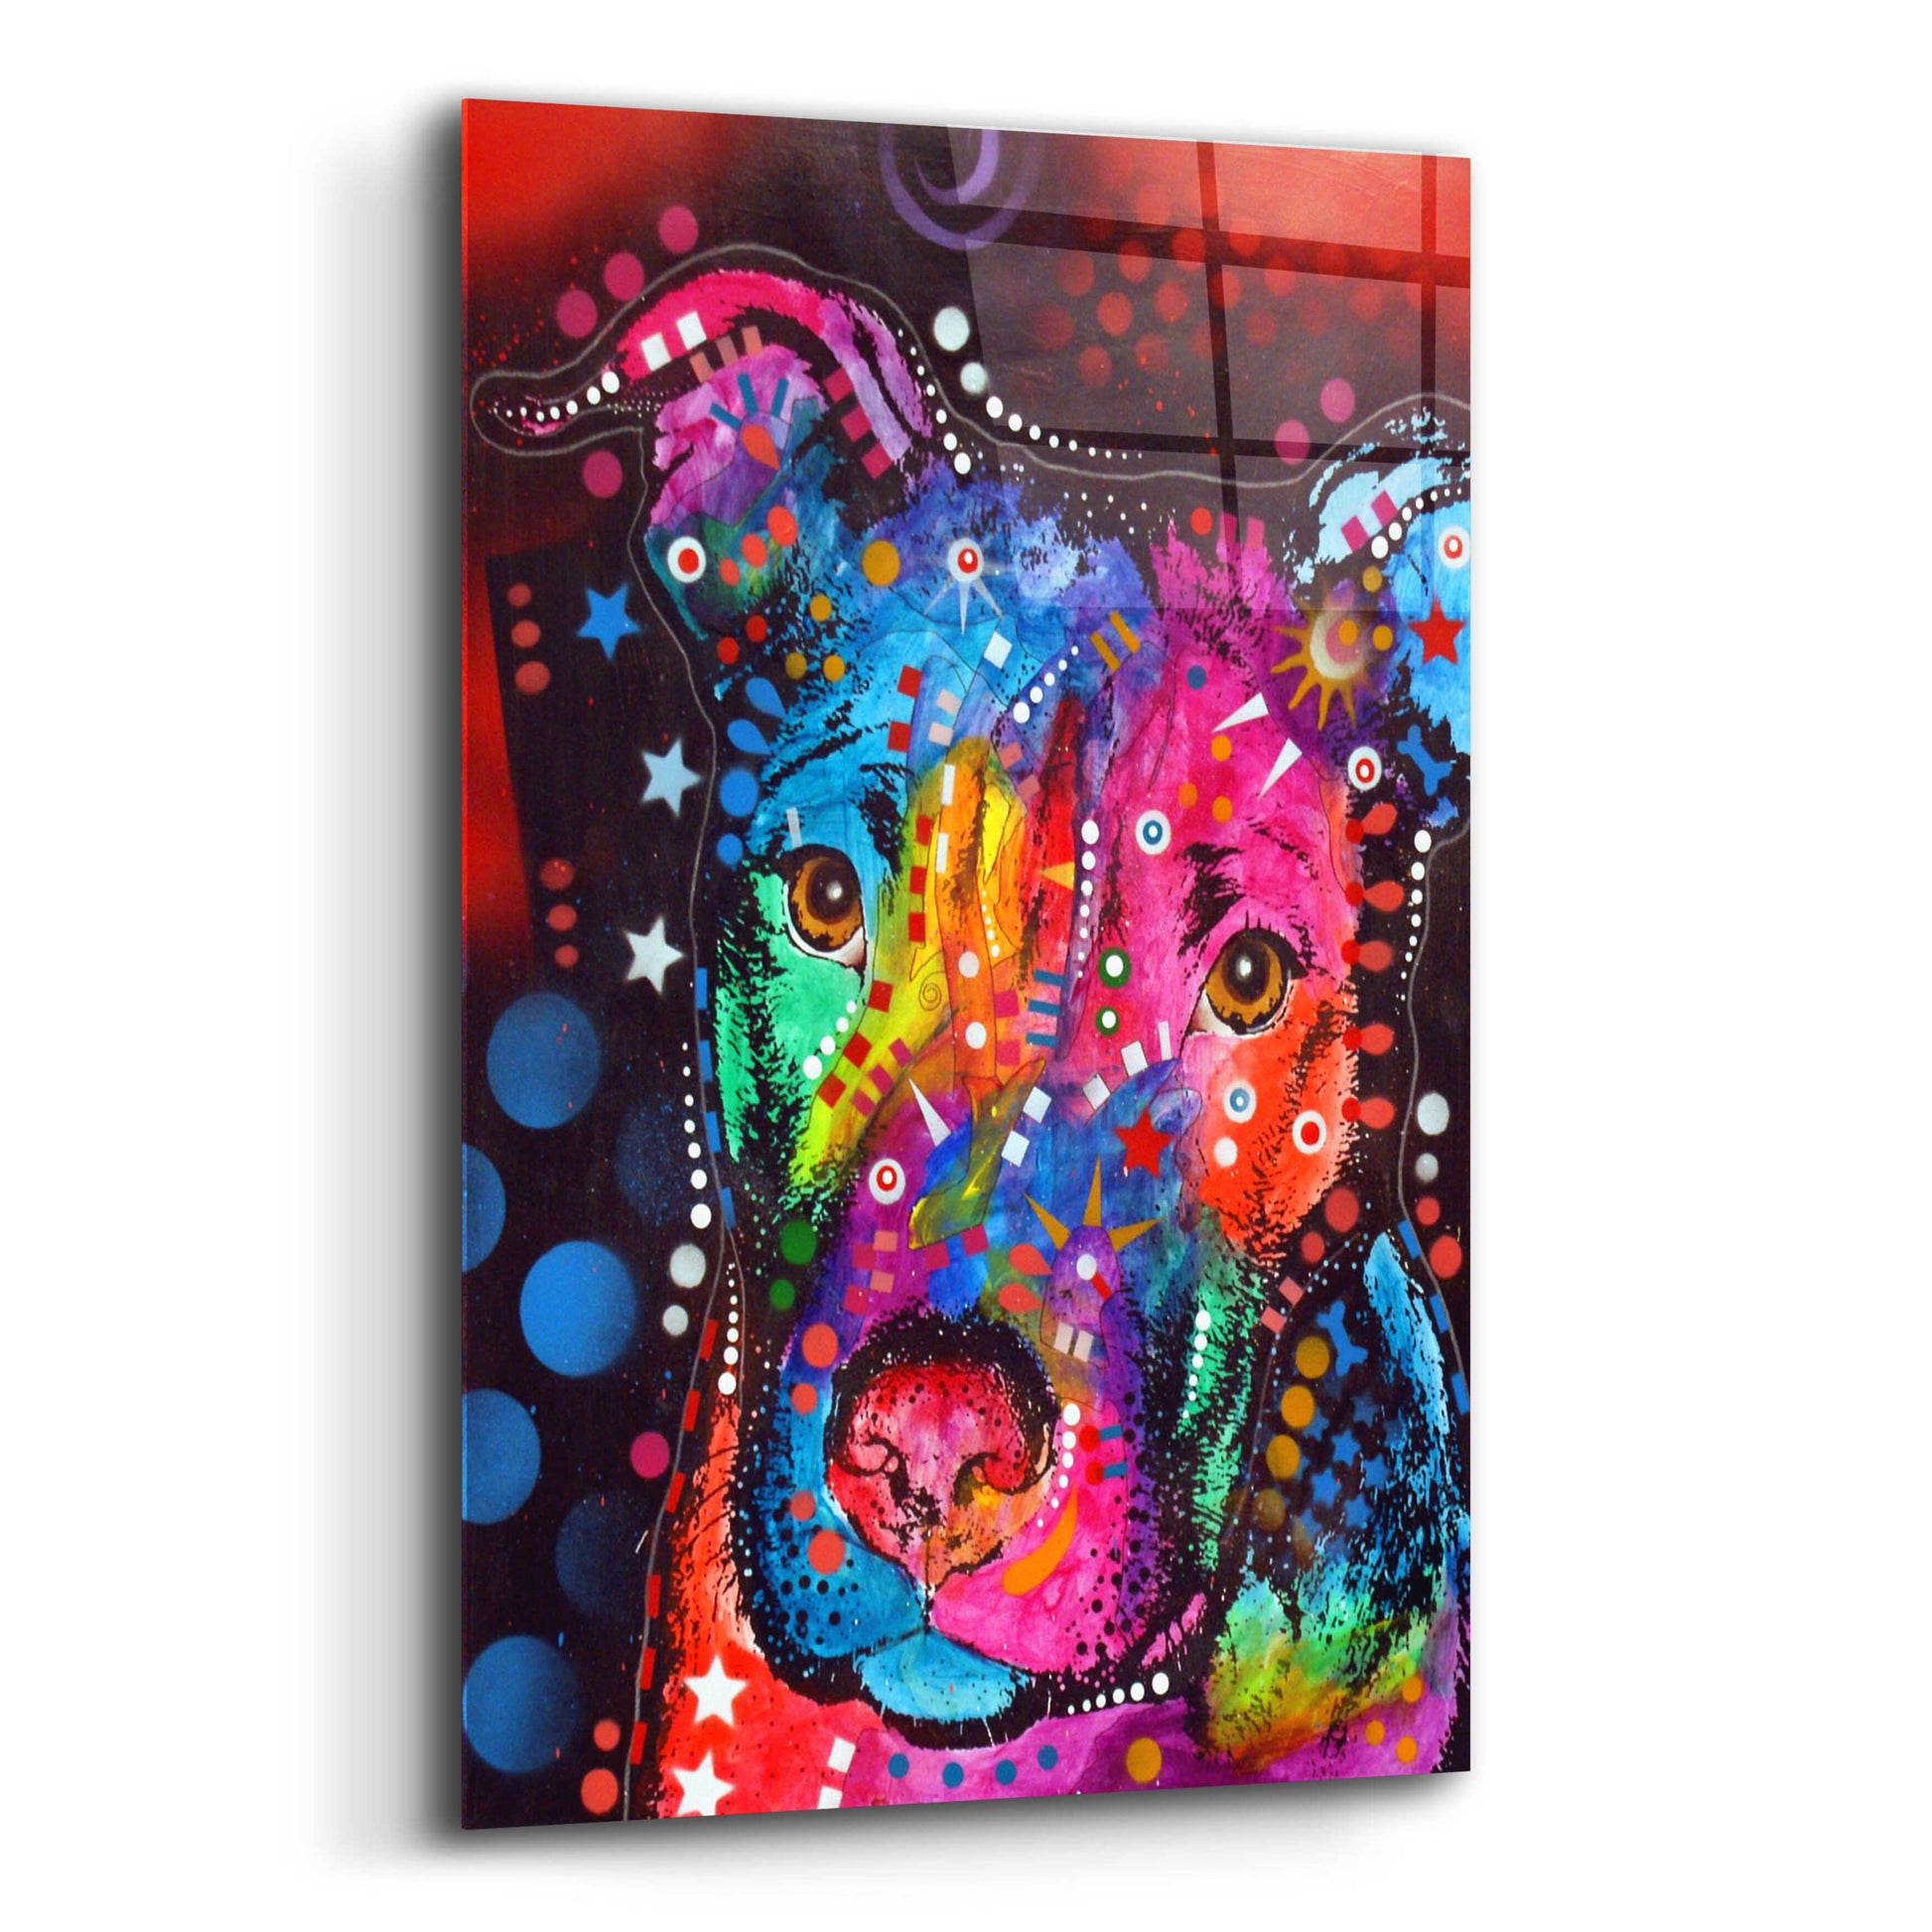 Epic Art 'Young Bull 120610' by Dean Russo, Acrylic Glass Wall Art,12x16